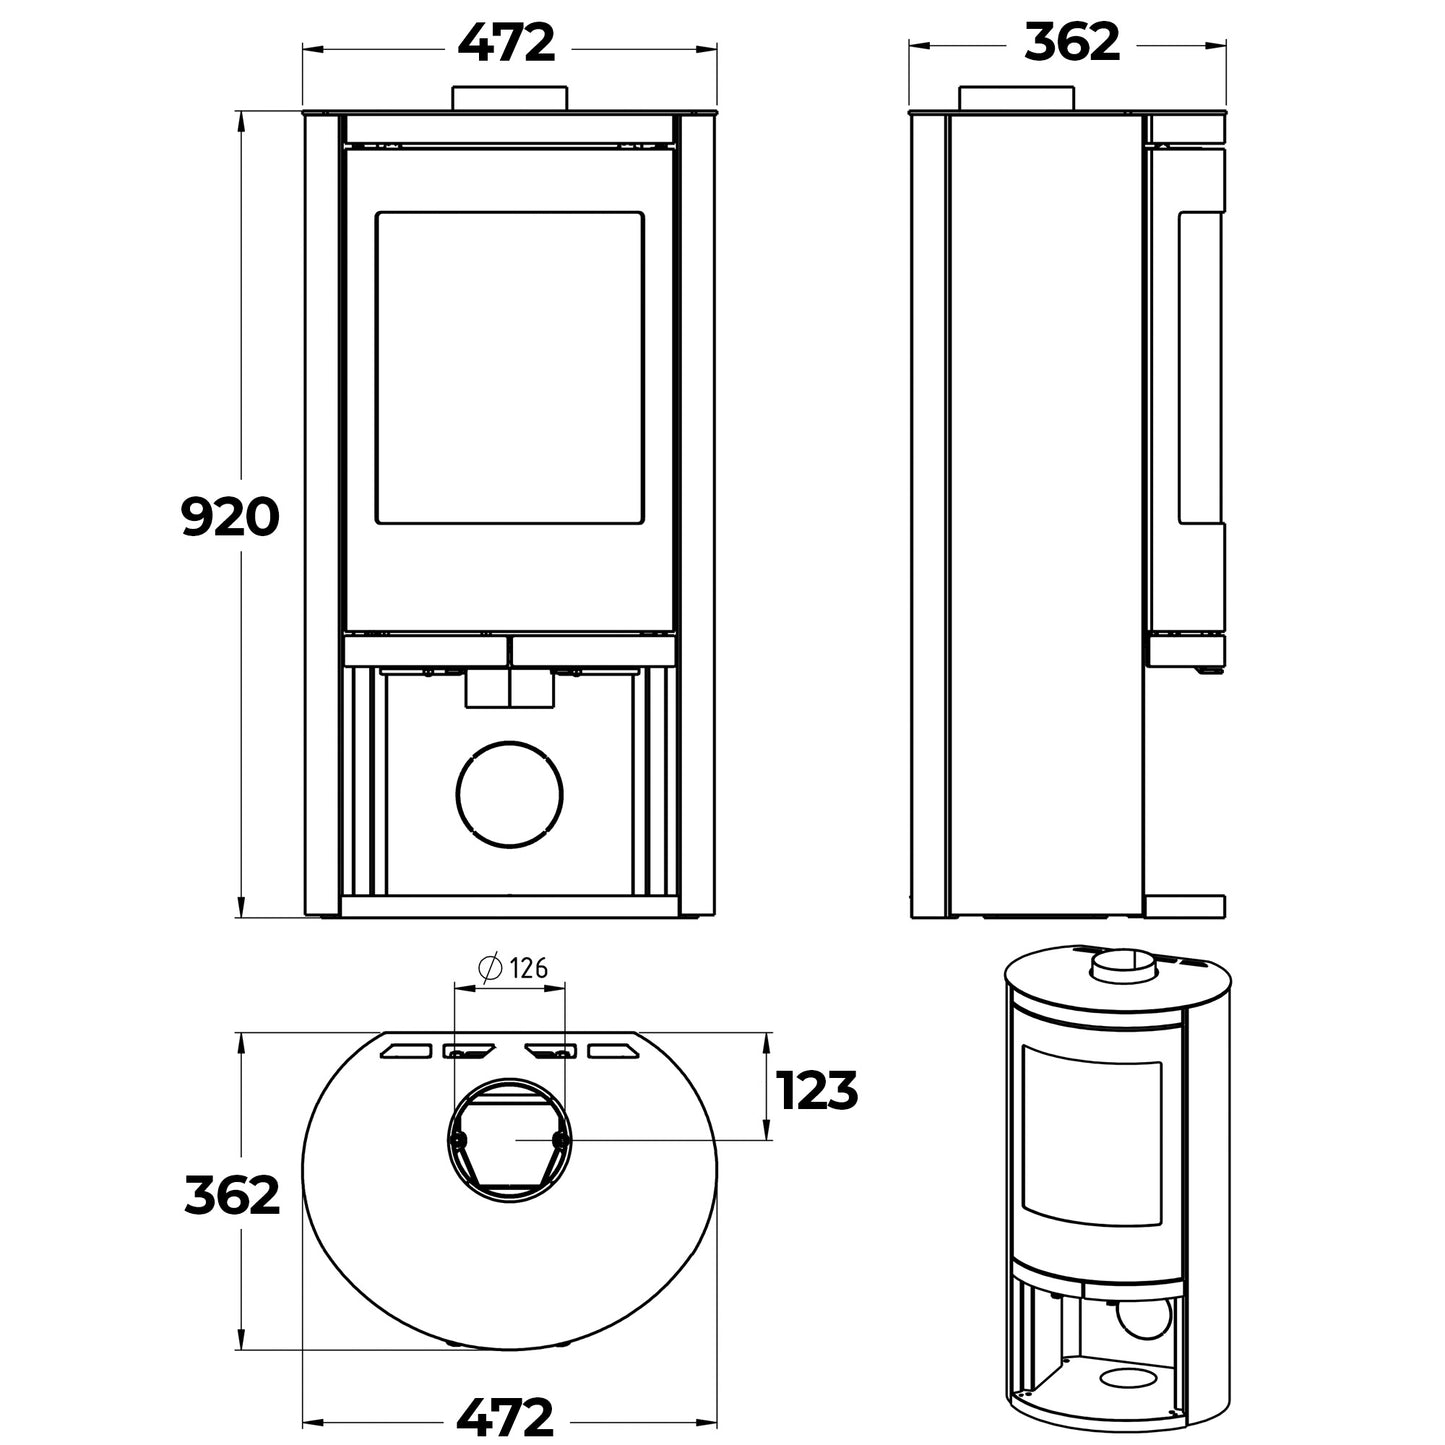 Specification and dimensions for the Ovale L.